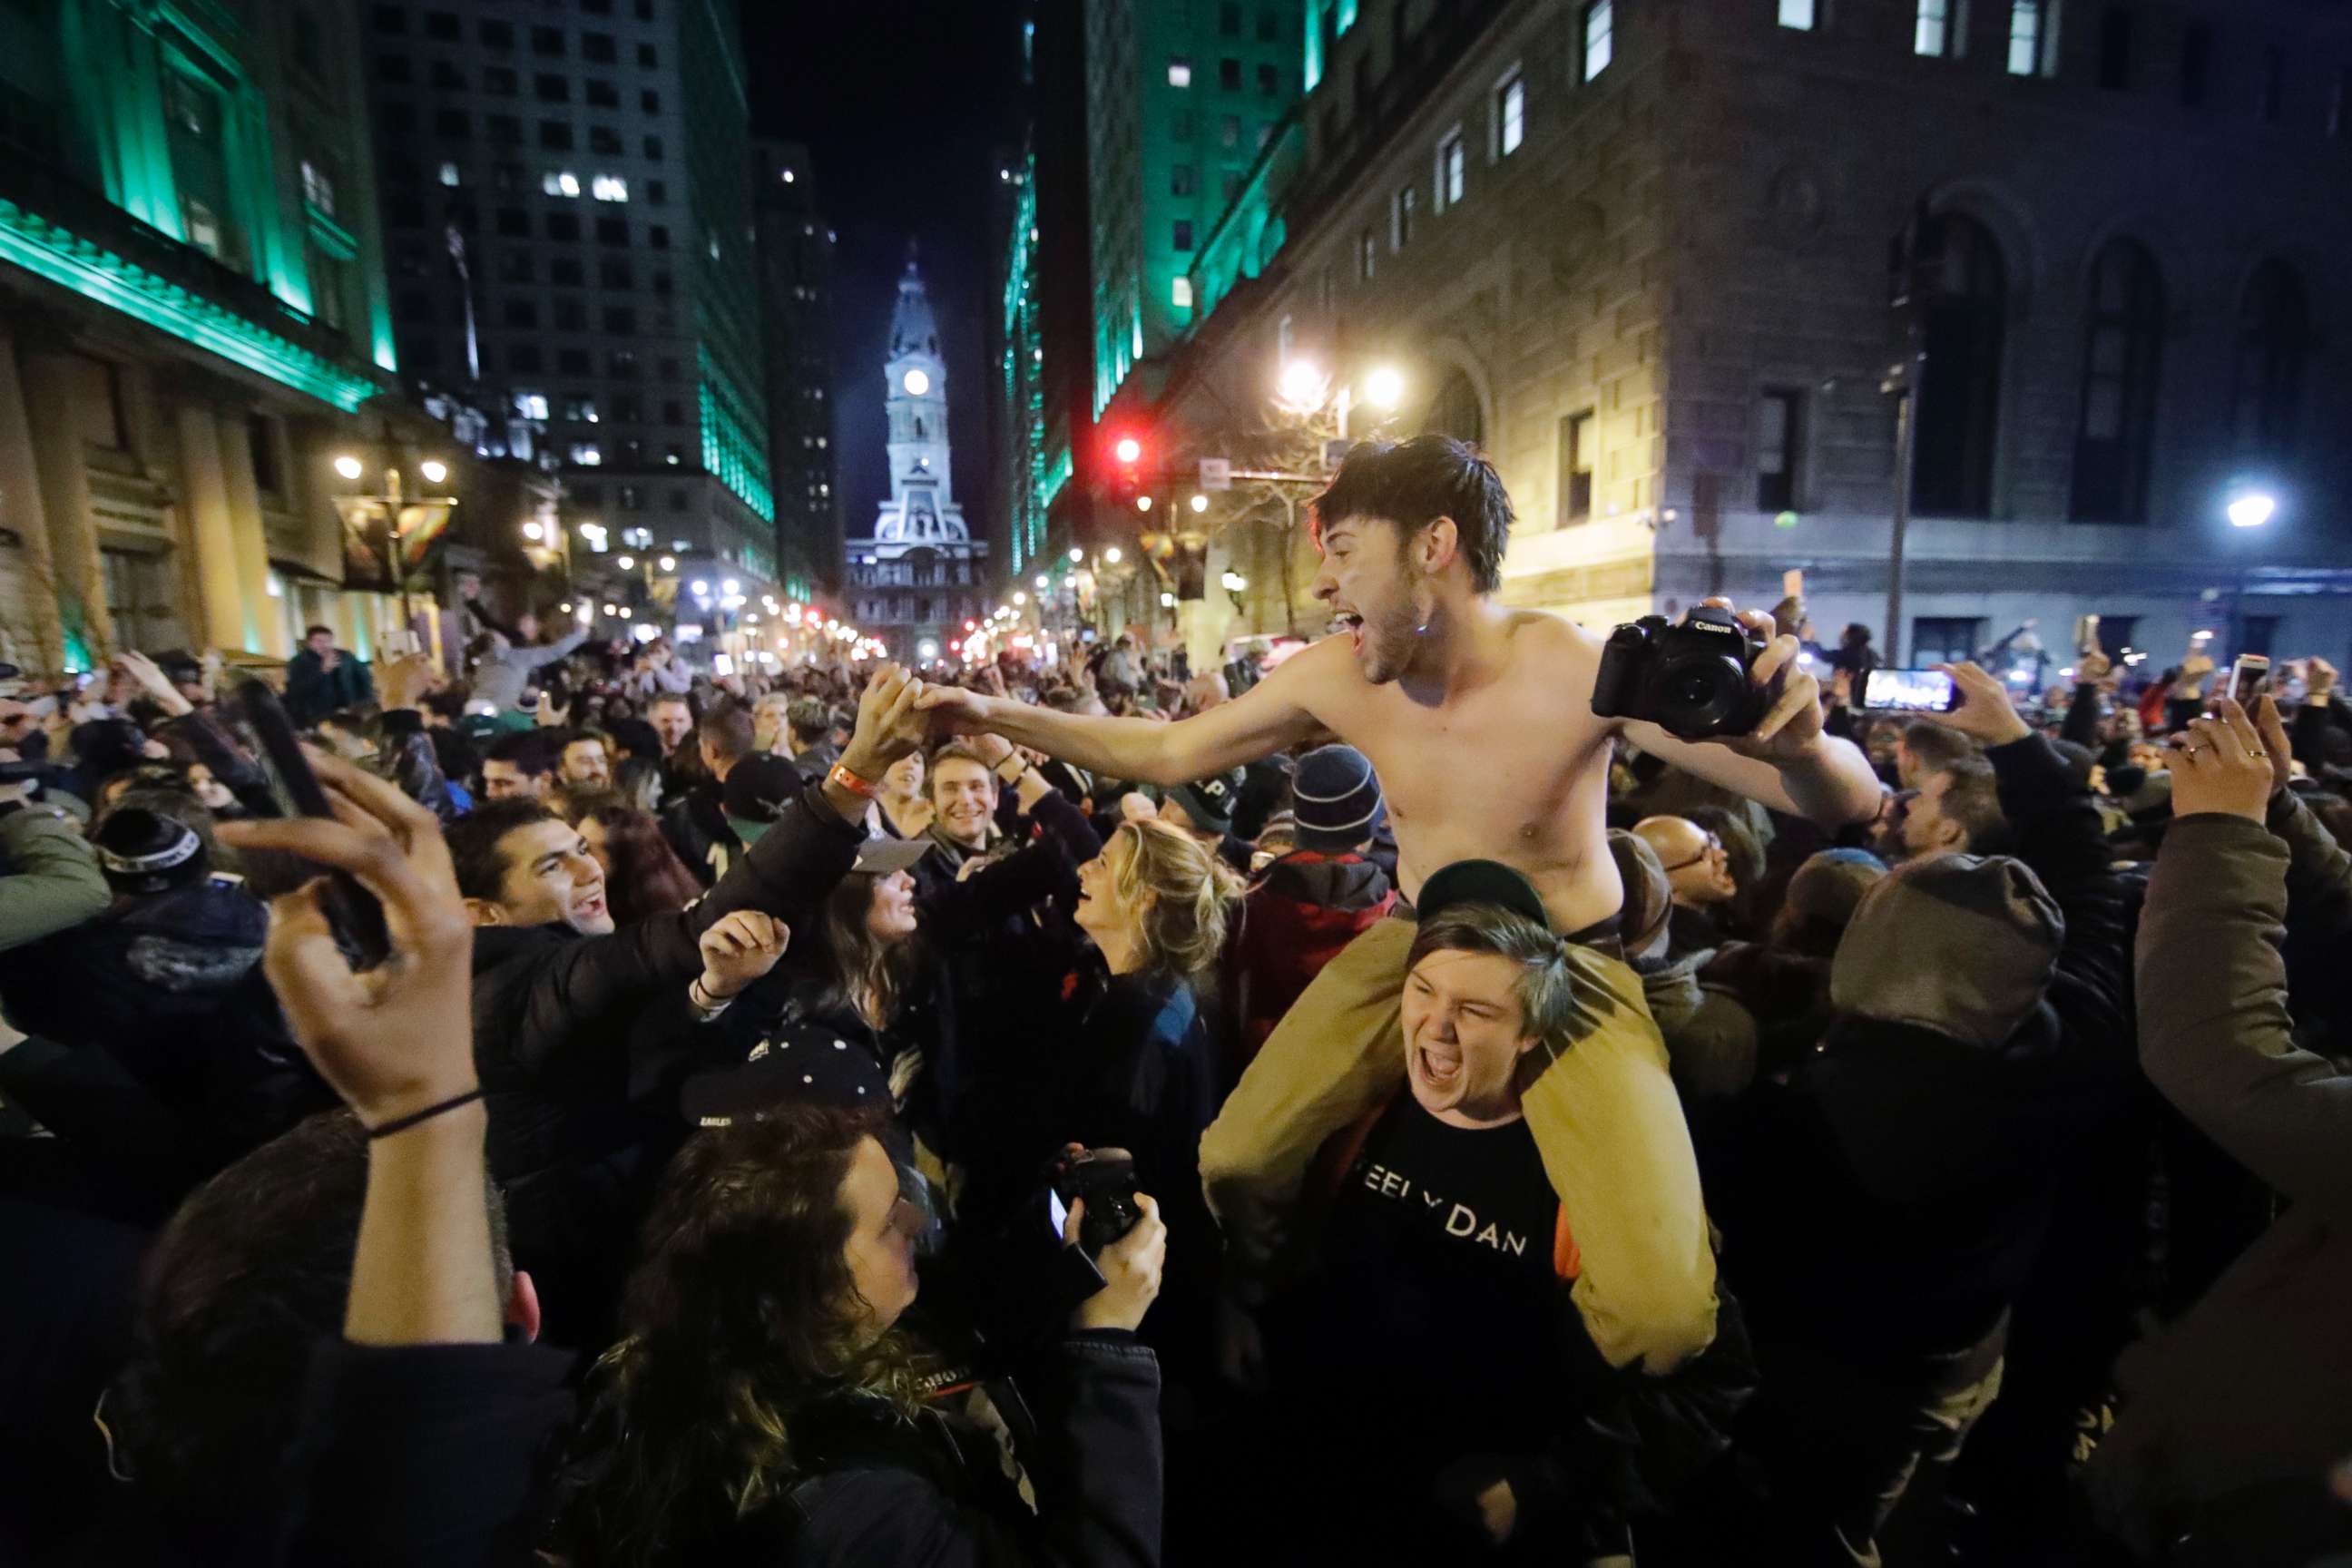 PHOTO: Philadelphia Eagles fans celebrate the team's victory in the NFL Super Bowl 52 between the Philadelphia Eagles and the New England Patriots, Feb. 4, 2018, in downtown Philadelphia.